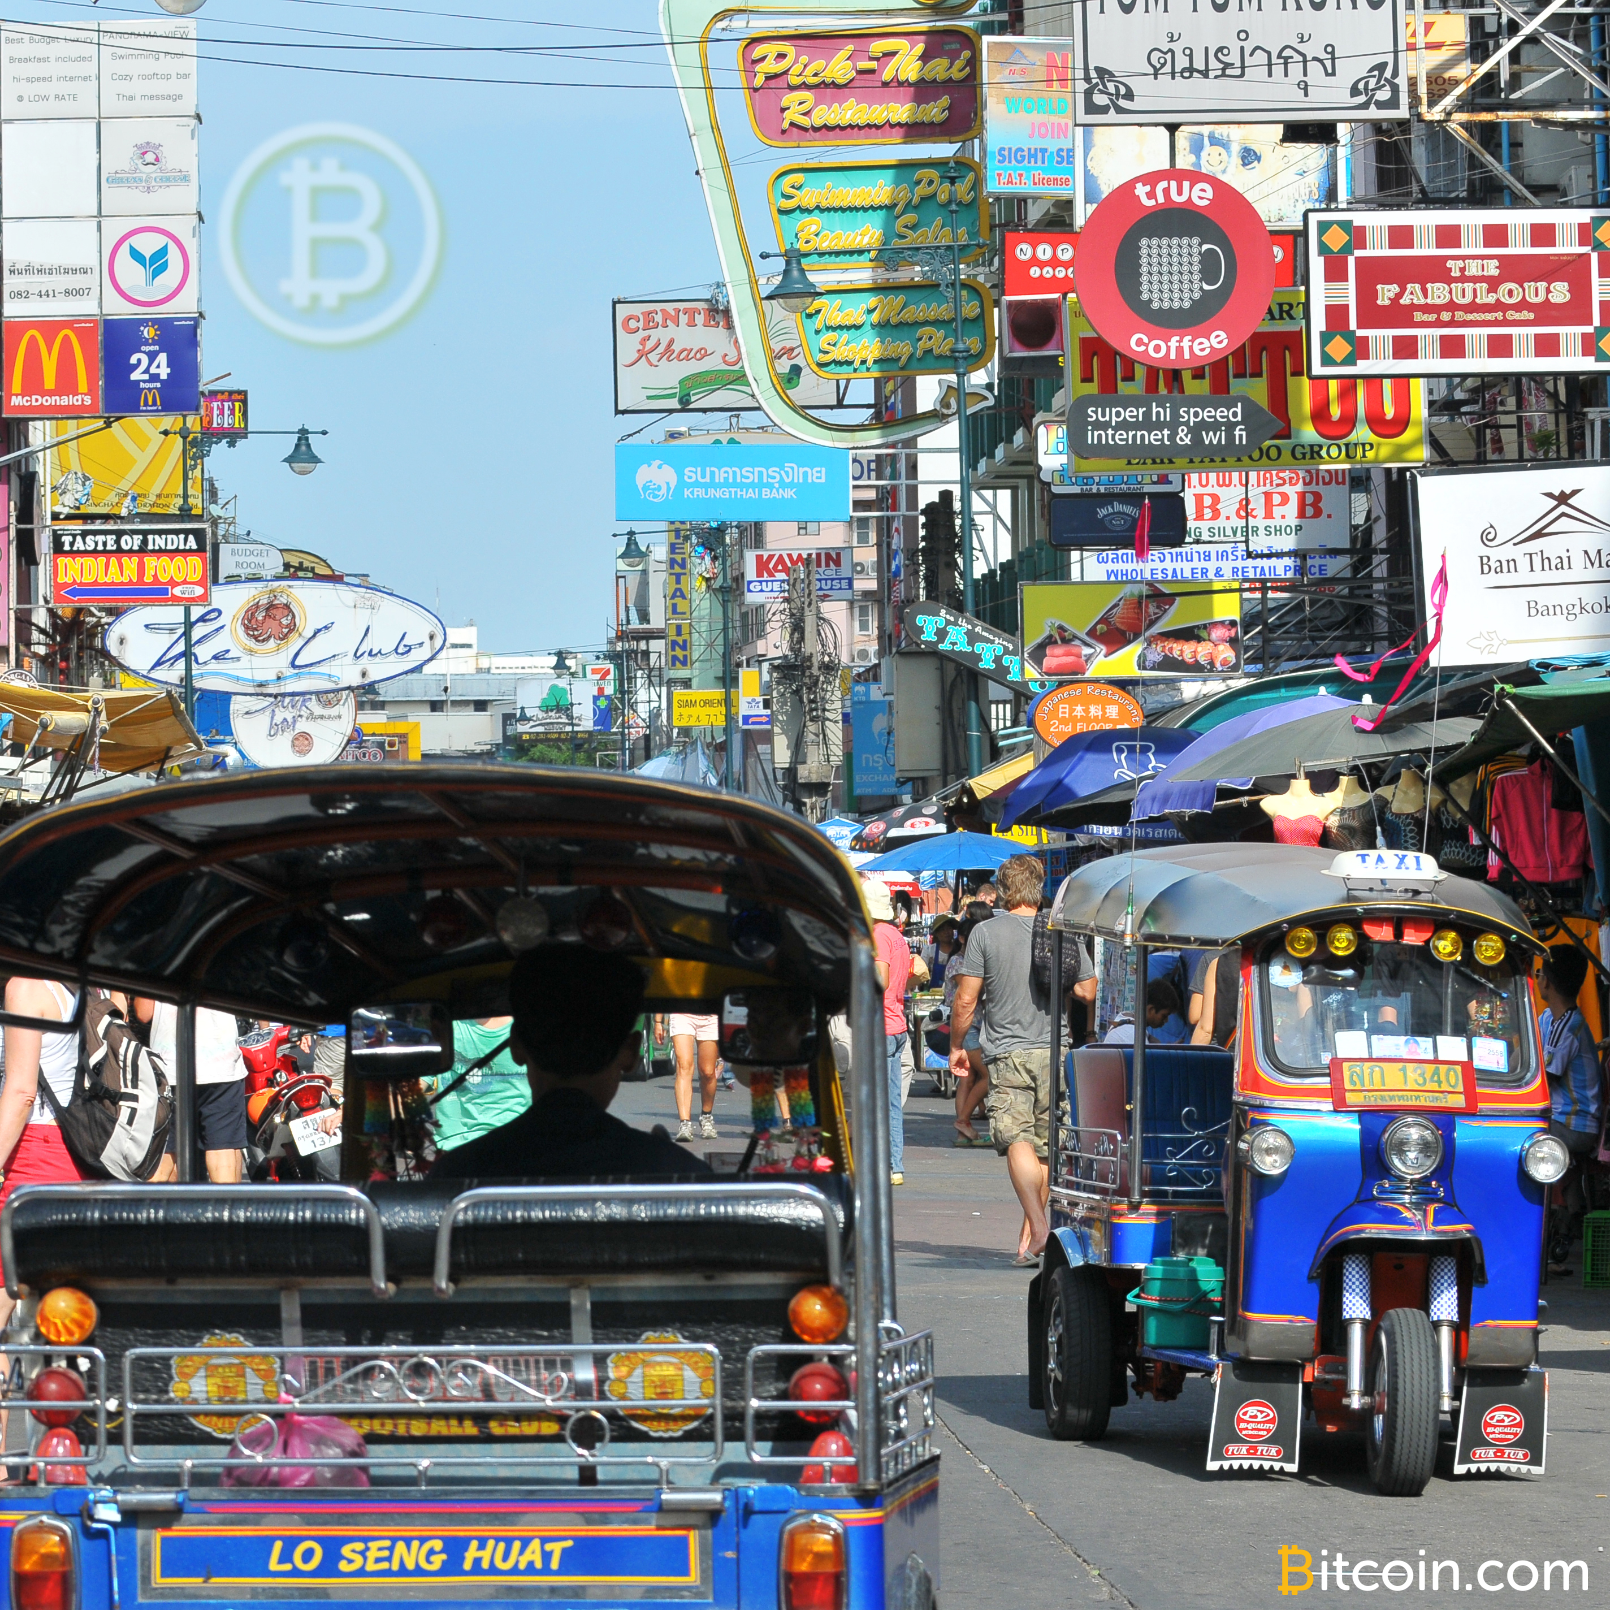 Thai Bank Terminates Account of Local Cryptocurrency Exchange